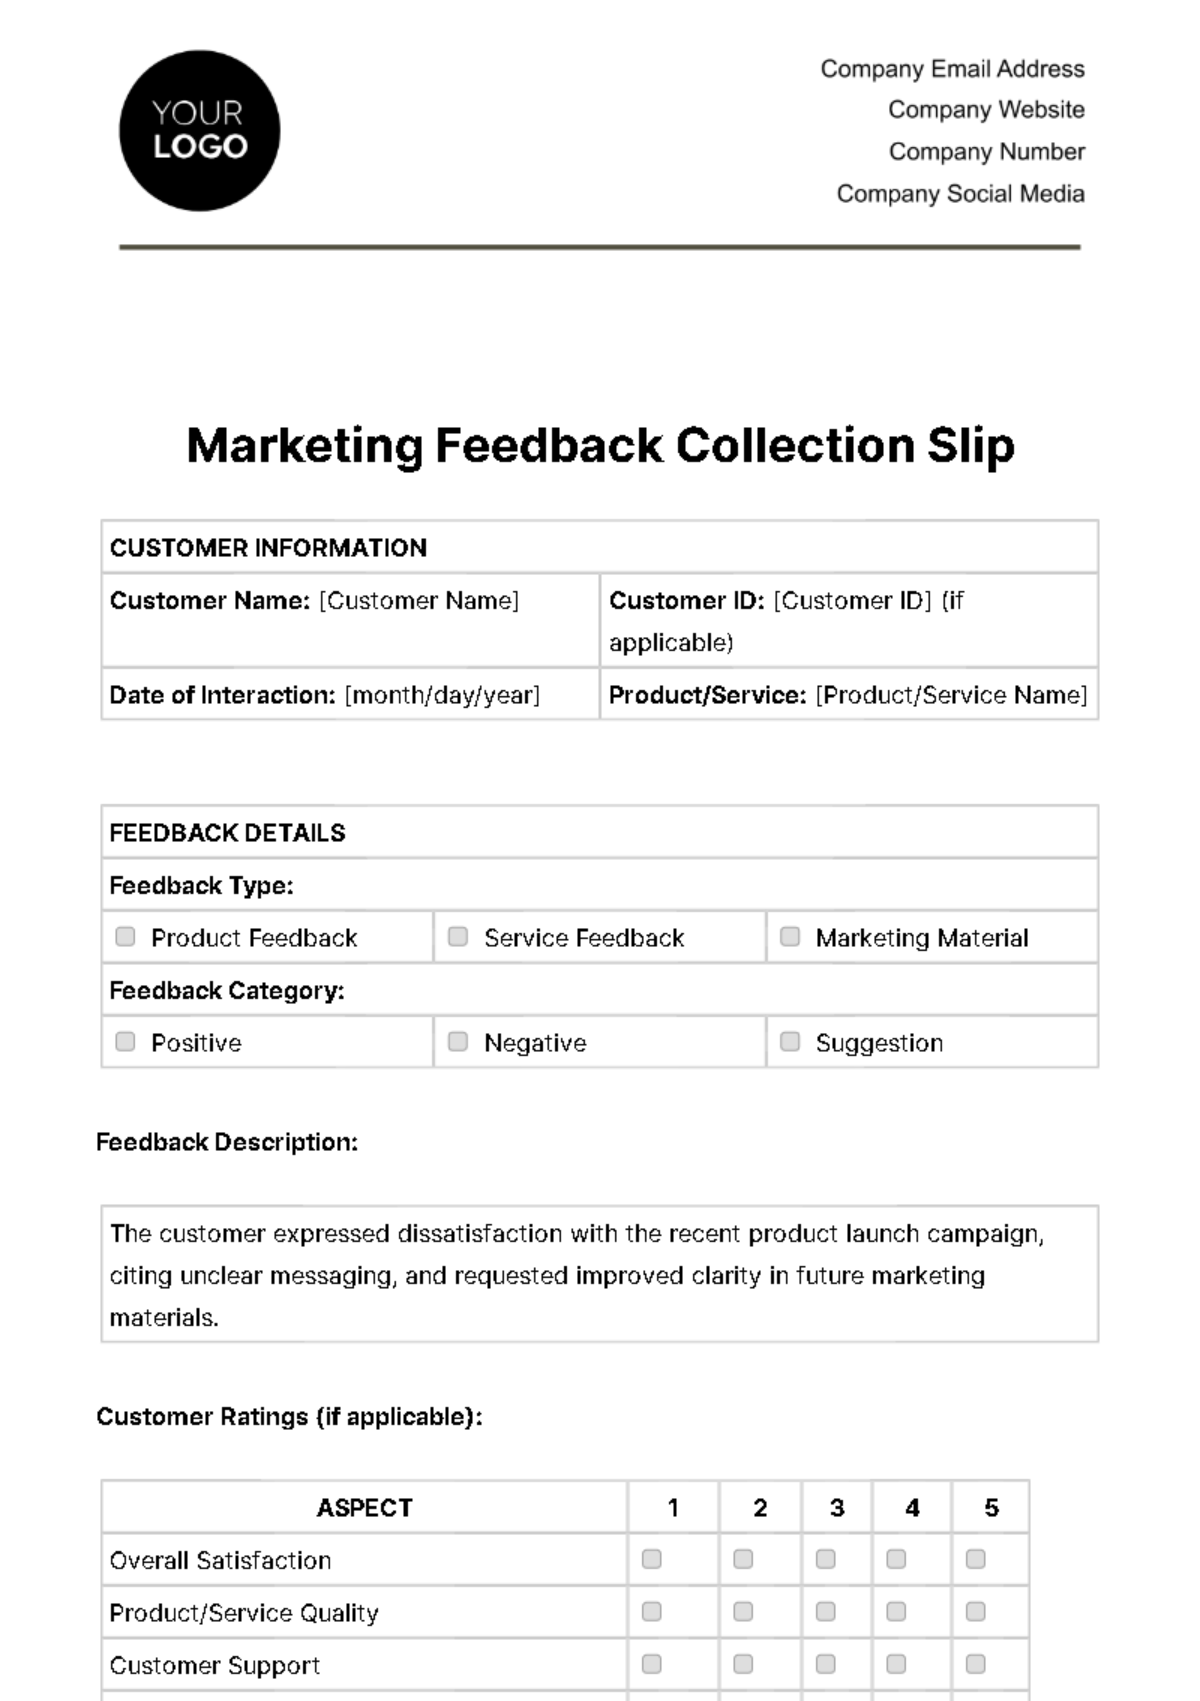 Free Marketing Feedback Collection Slip Template